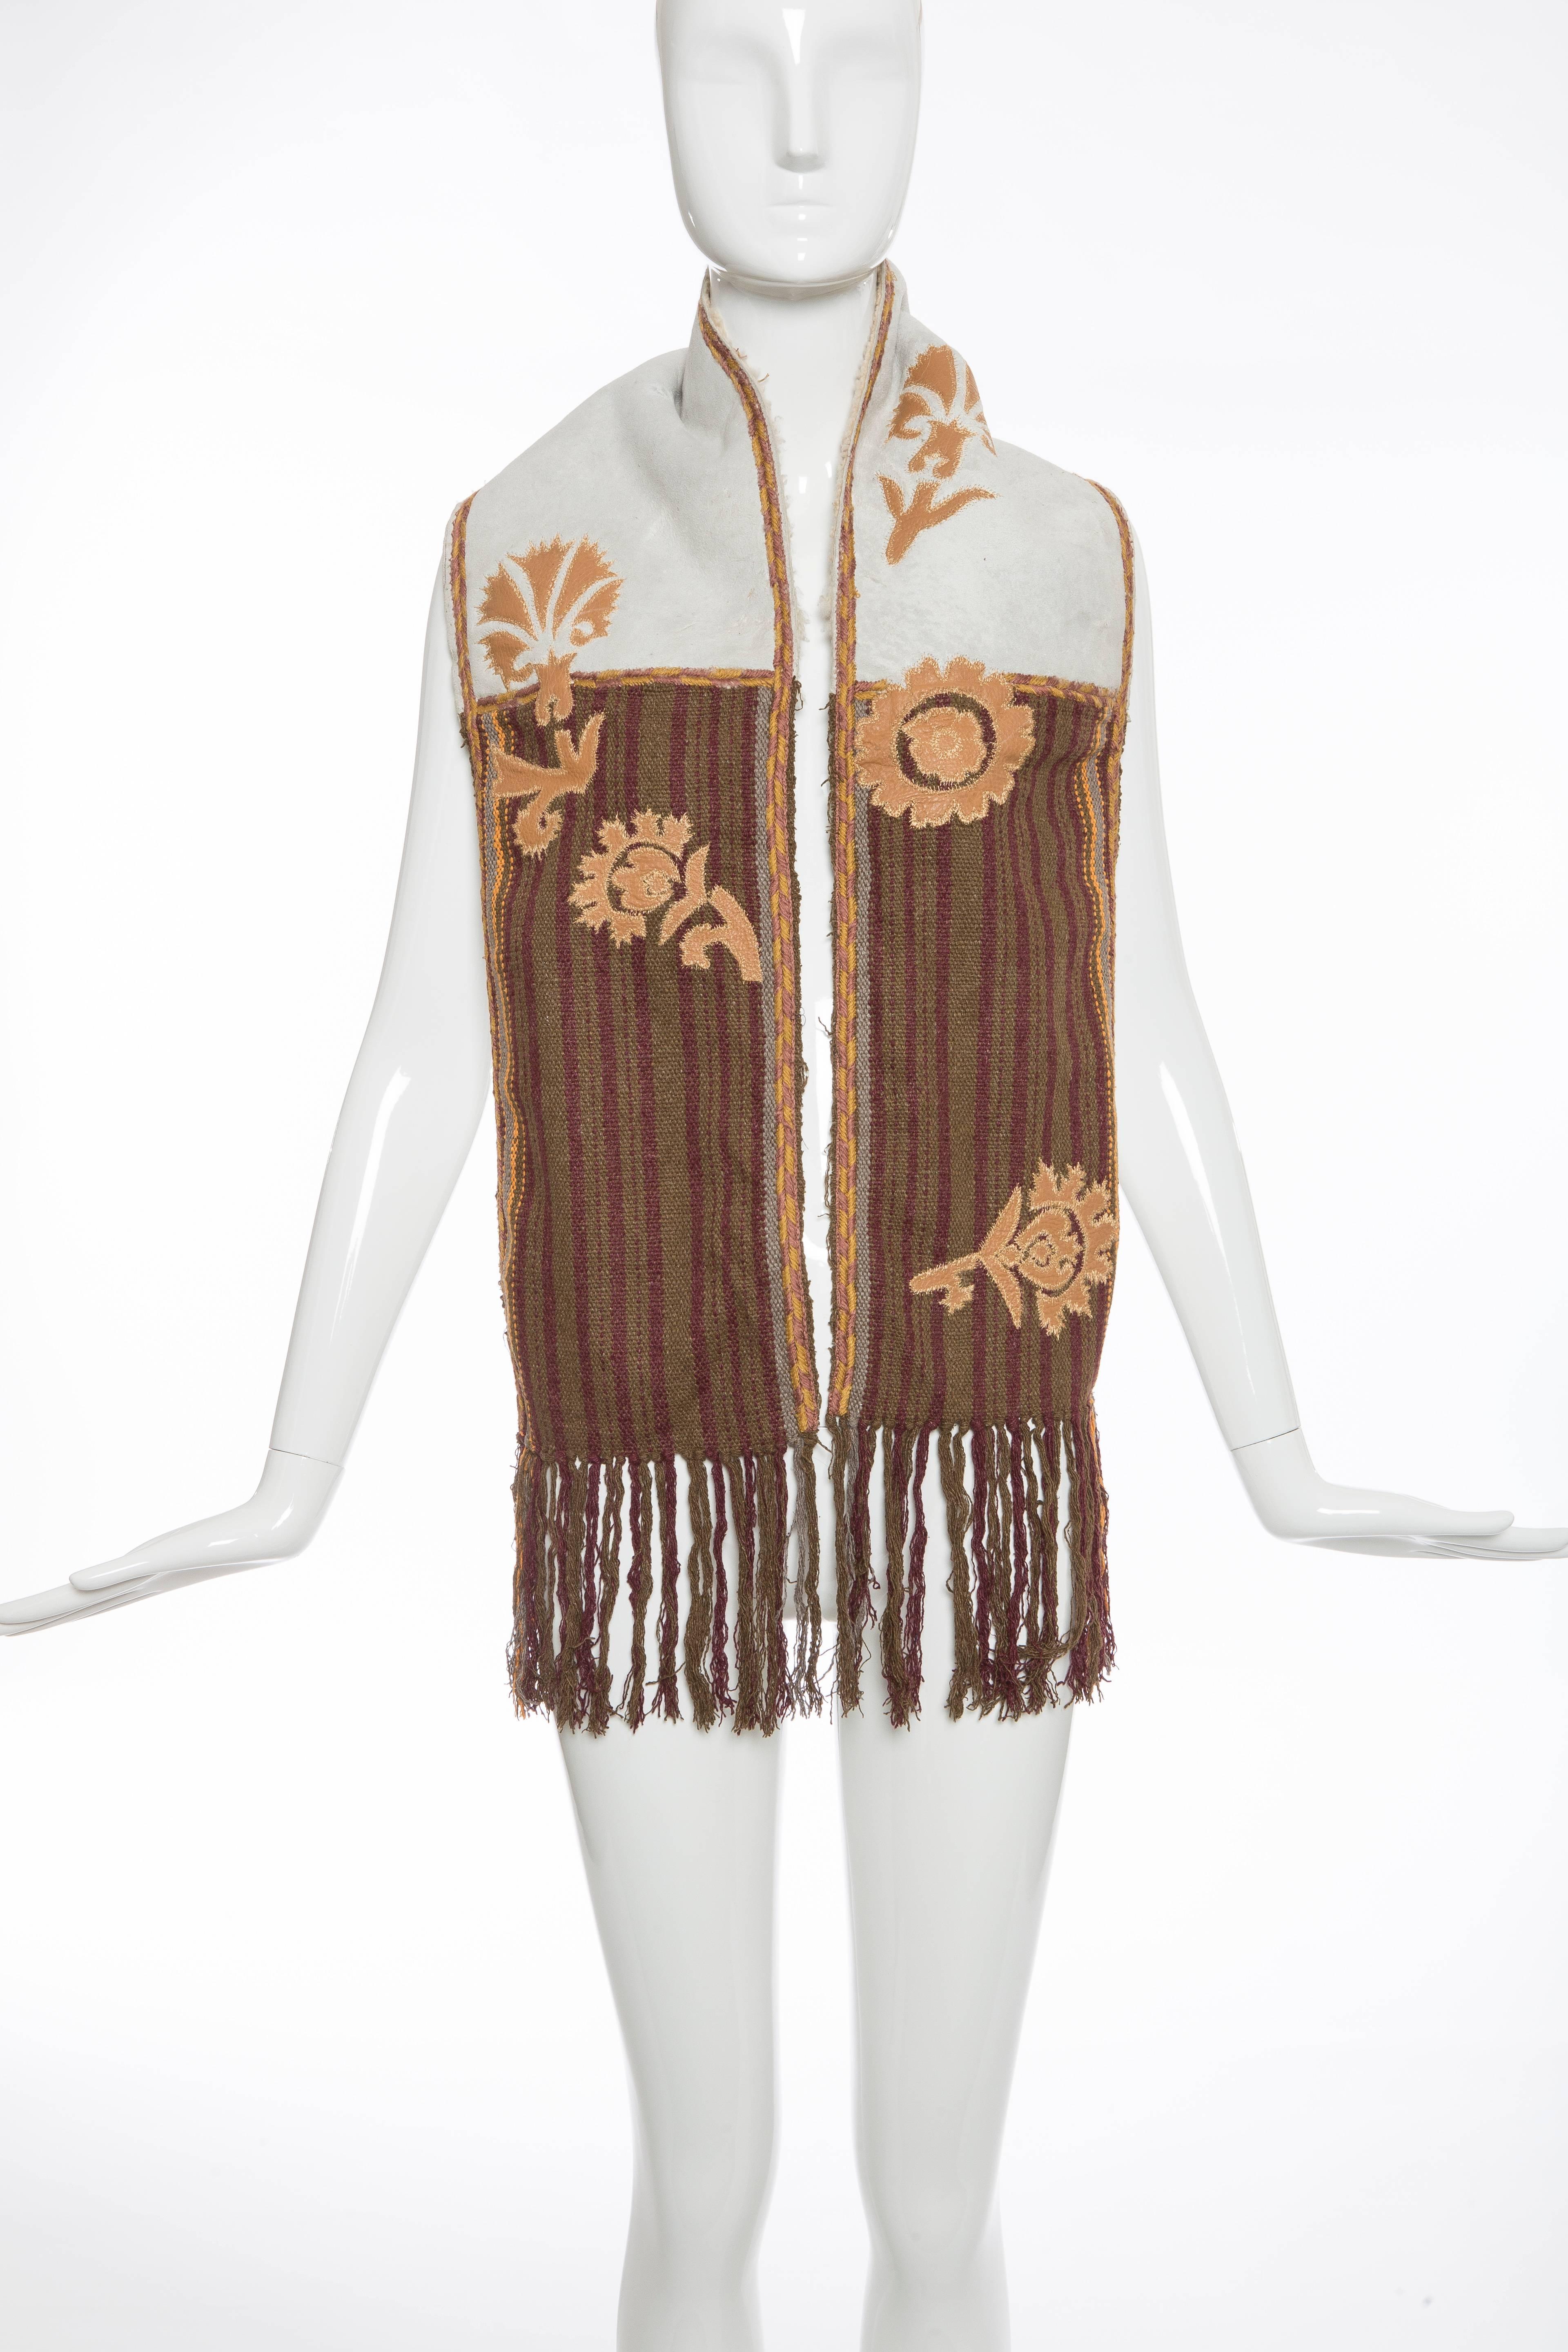 Dries van Noten, Autumn-Winter 2002, silk and wool-blend scarf with embroidery throughout, suede panel featuring shearling trim and fringe trim at ends.

35% Silk, 35% Wool, 30% Leather
Measurements: Length 60